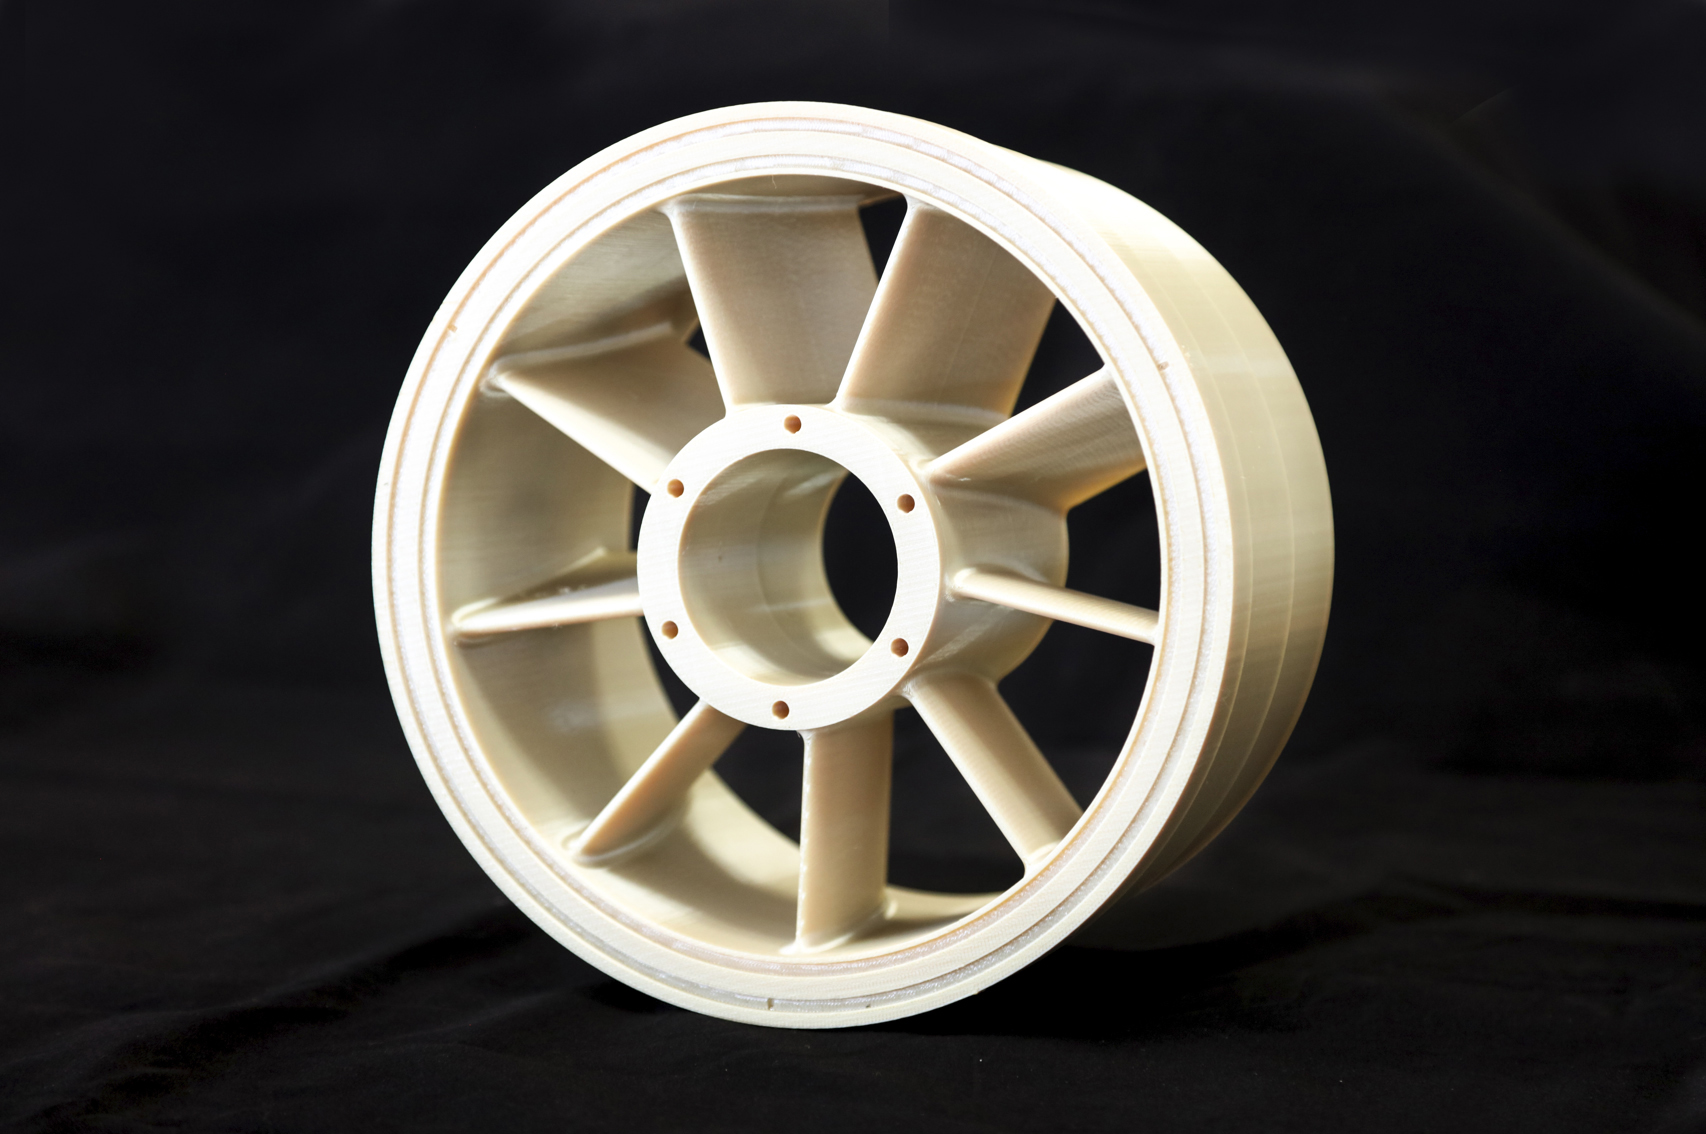 This turbine component, known as a fixed guide vanes ring, was produced by means of additive manufacturing, more commonly known as 3D printing. (Image courtesy of ORNL, U.S. Department of Energy)